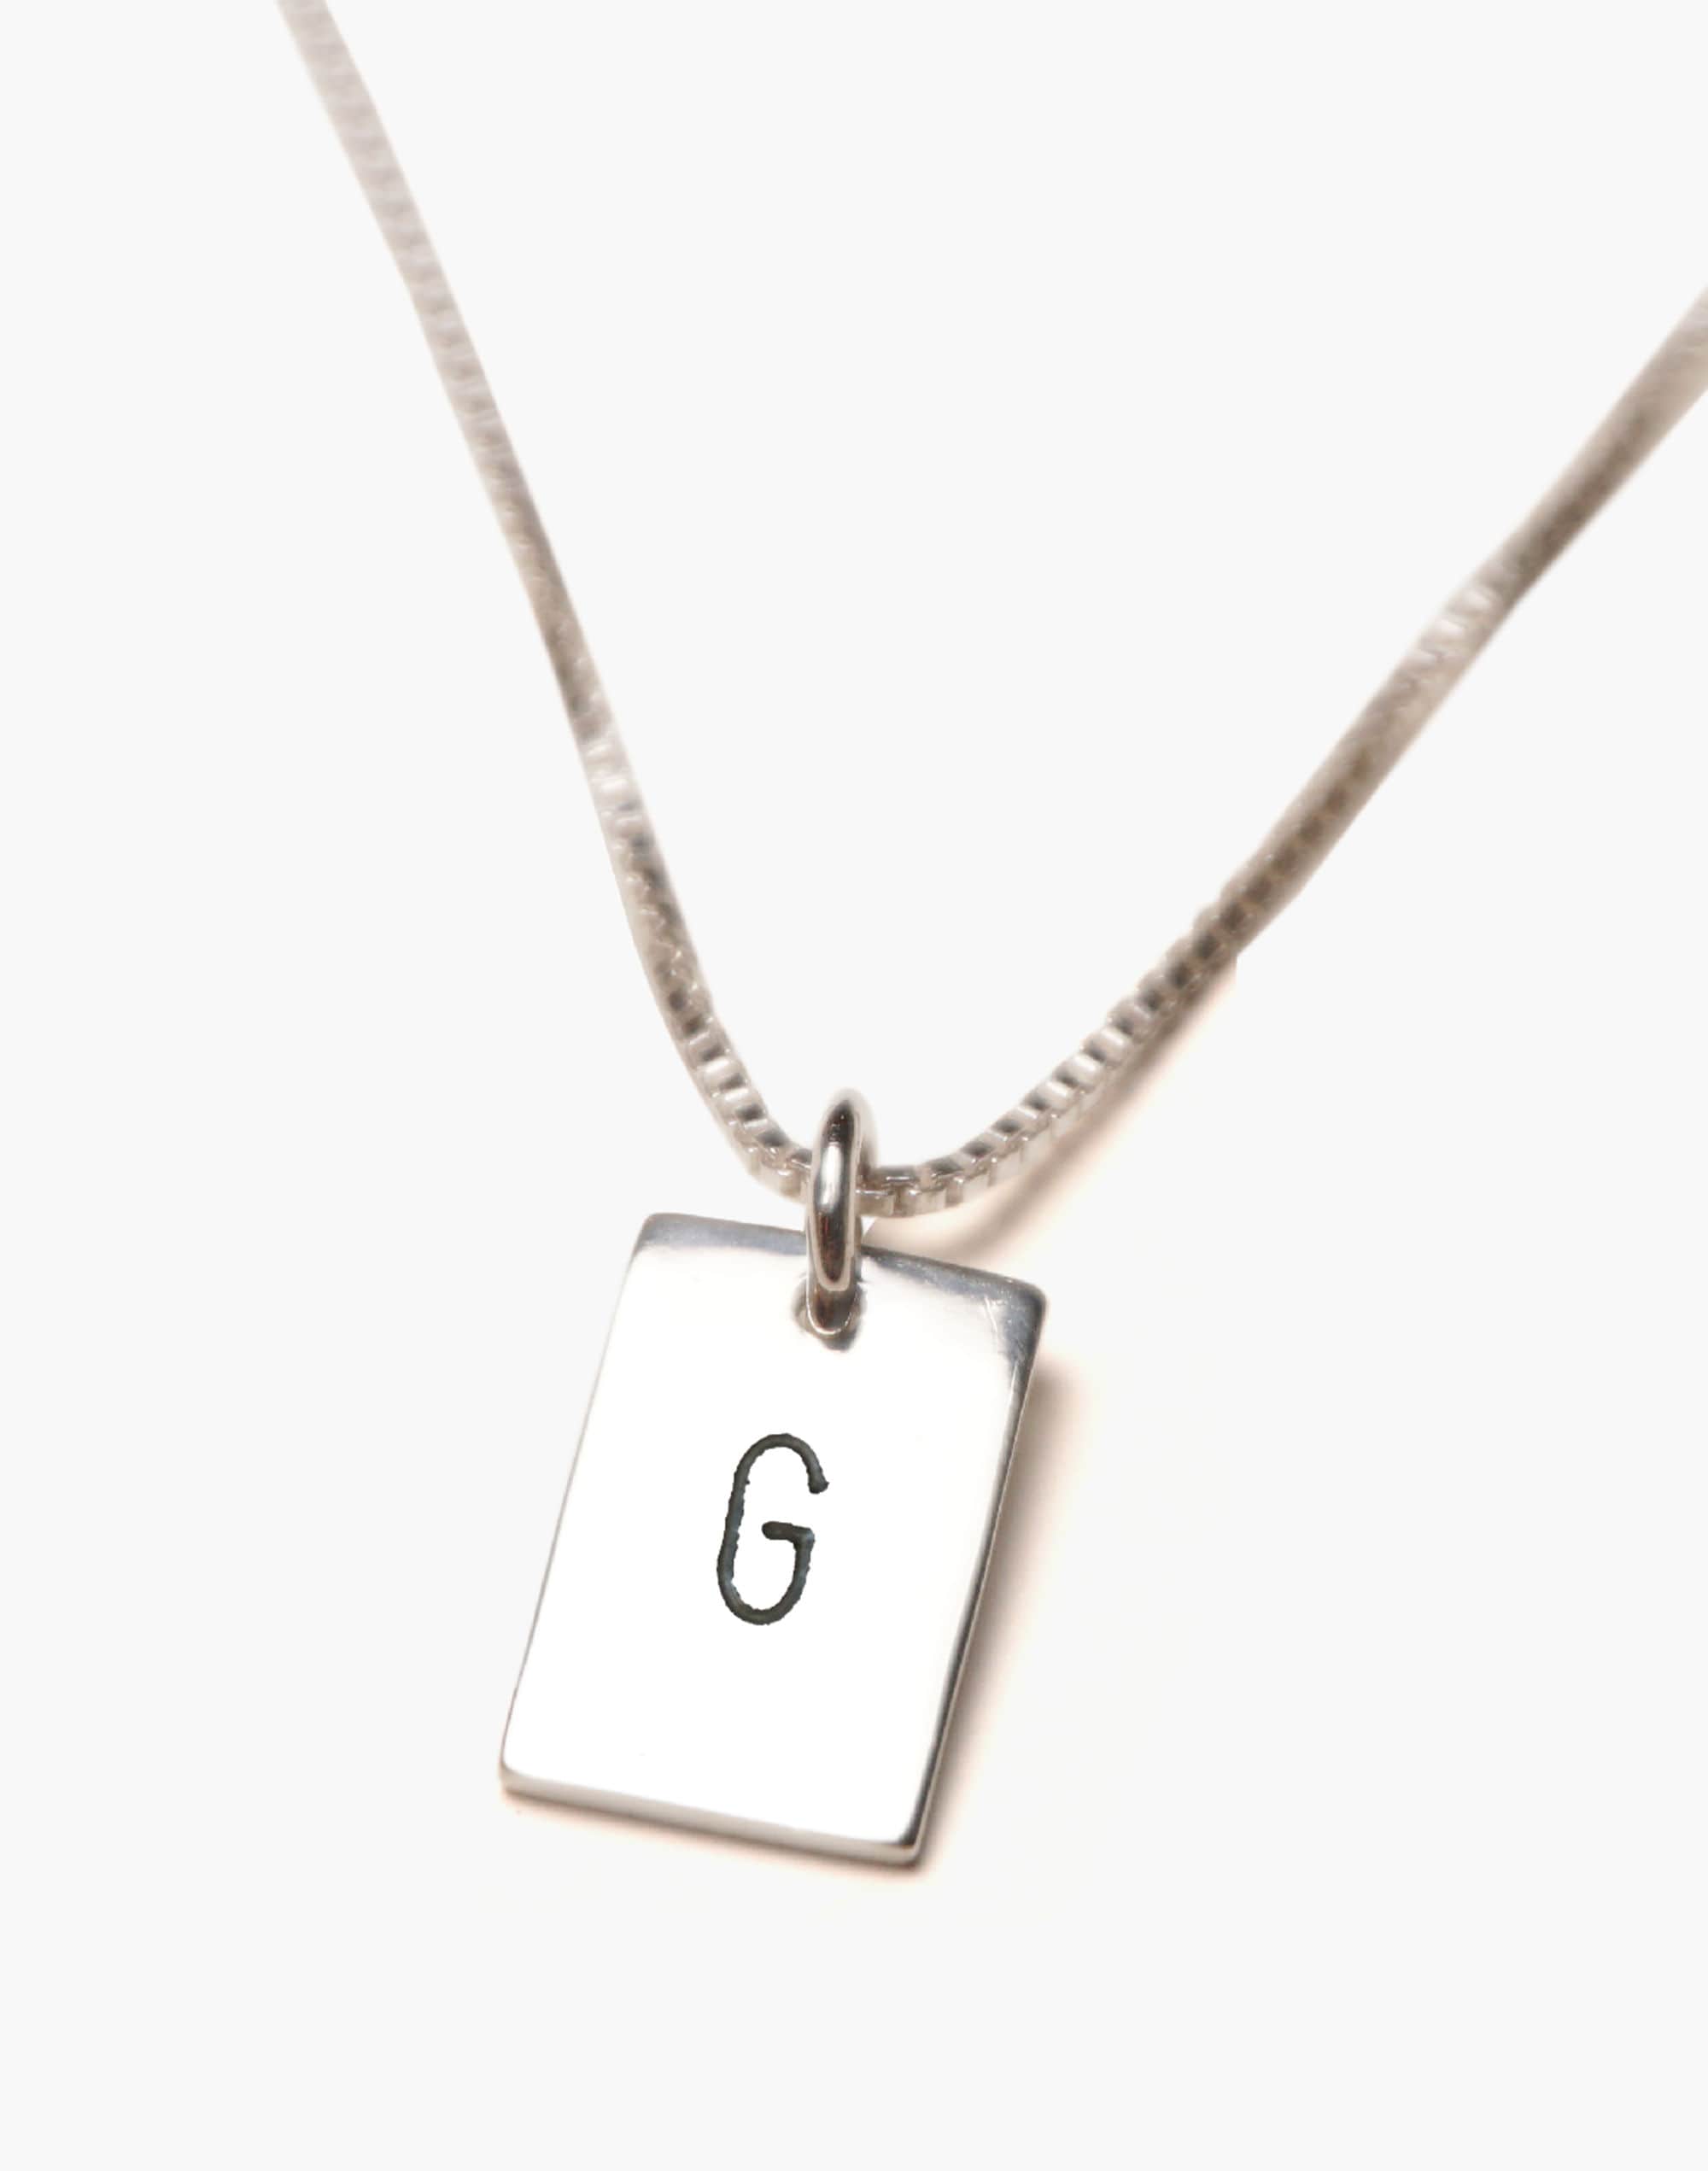 CHARLOTTE CAUWE STUDIO Letter Stamp Tag Necklace in Sterling Silver